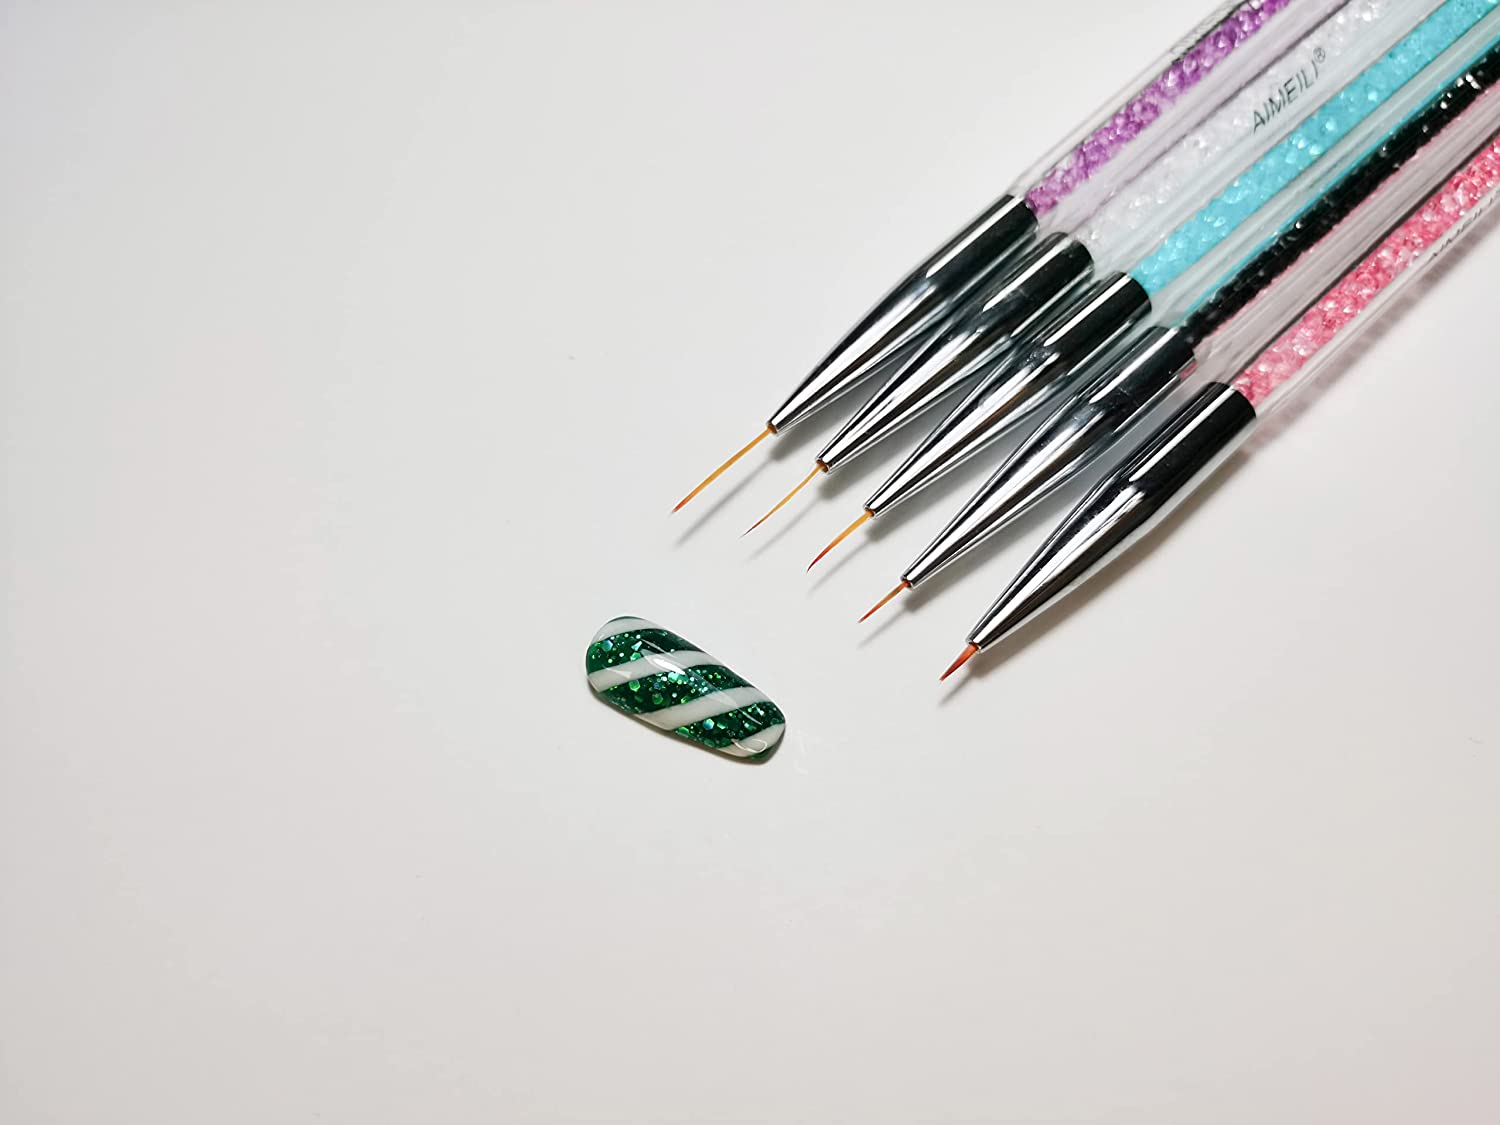 Brush Up on Your Nail Game with Mylee's New Nail Art Brushes – Mylee